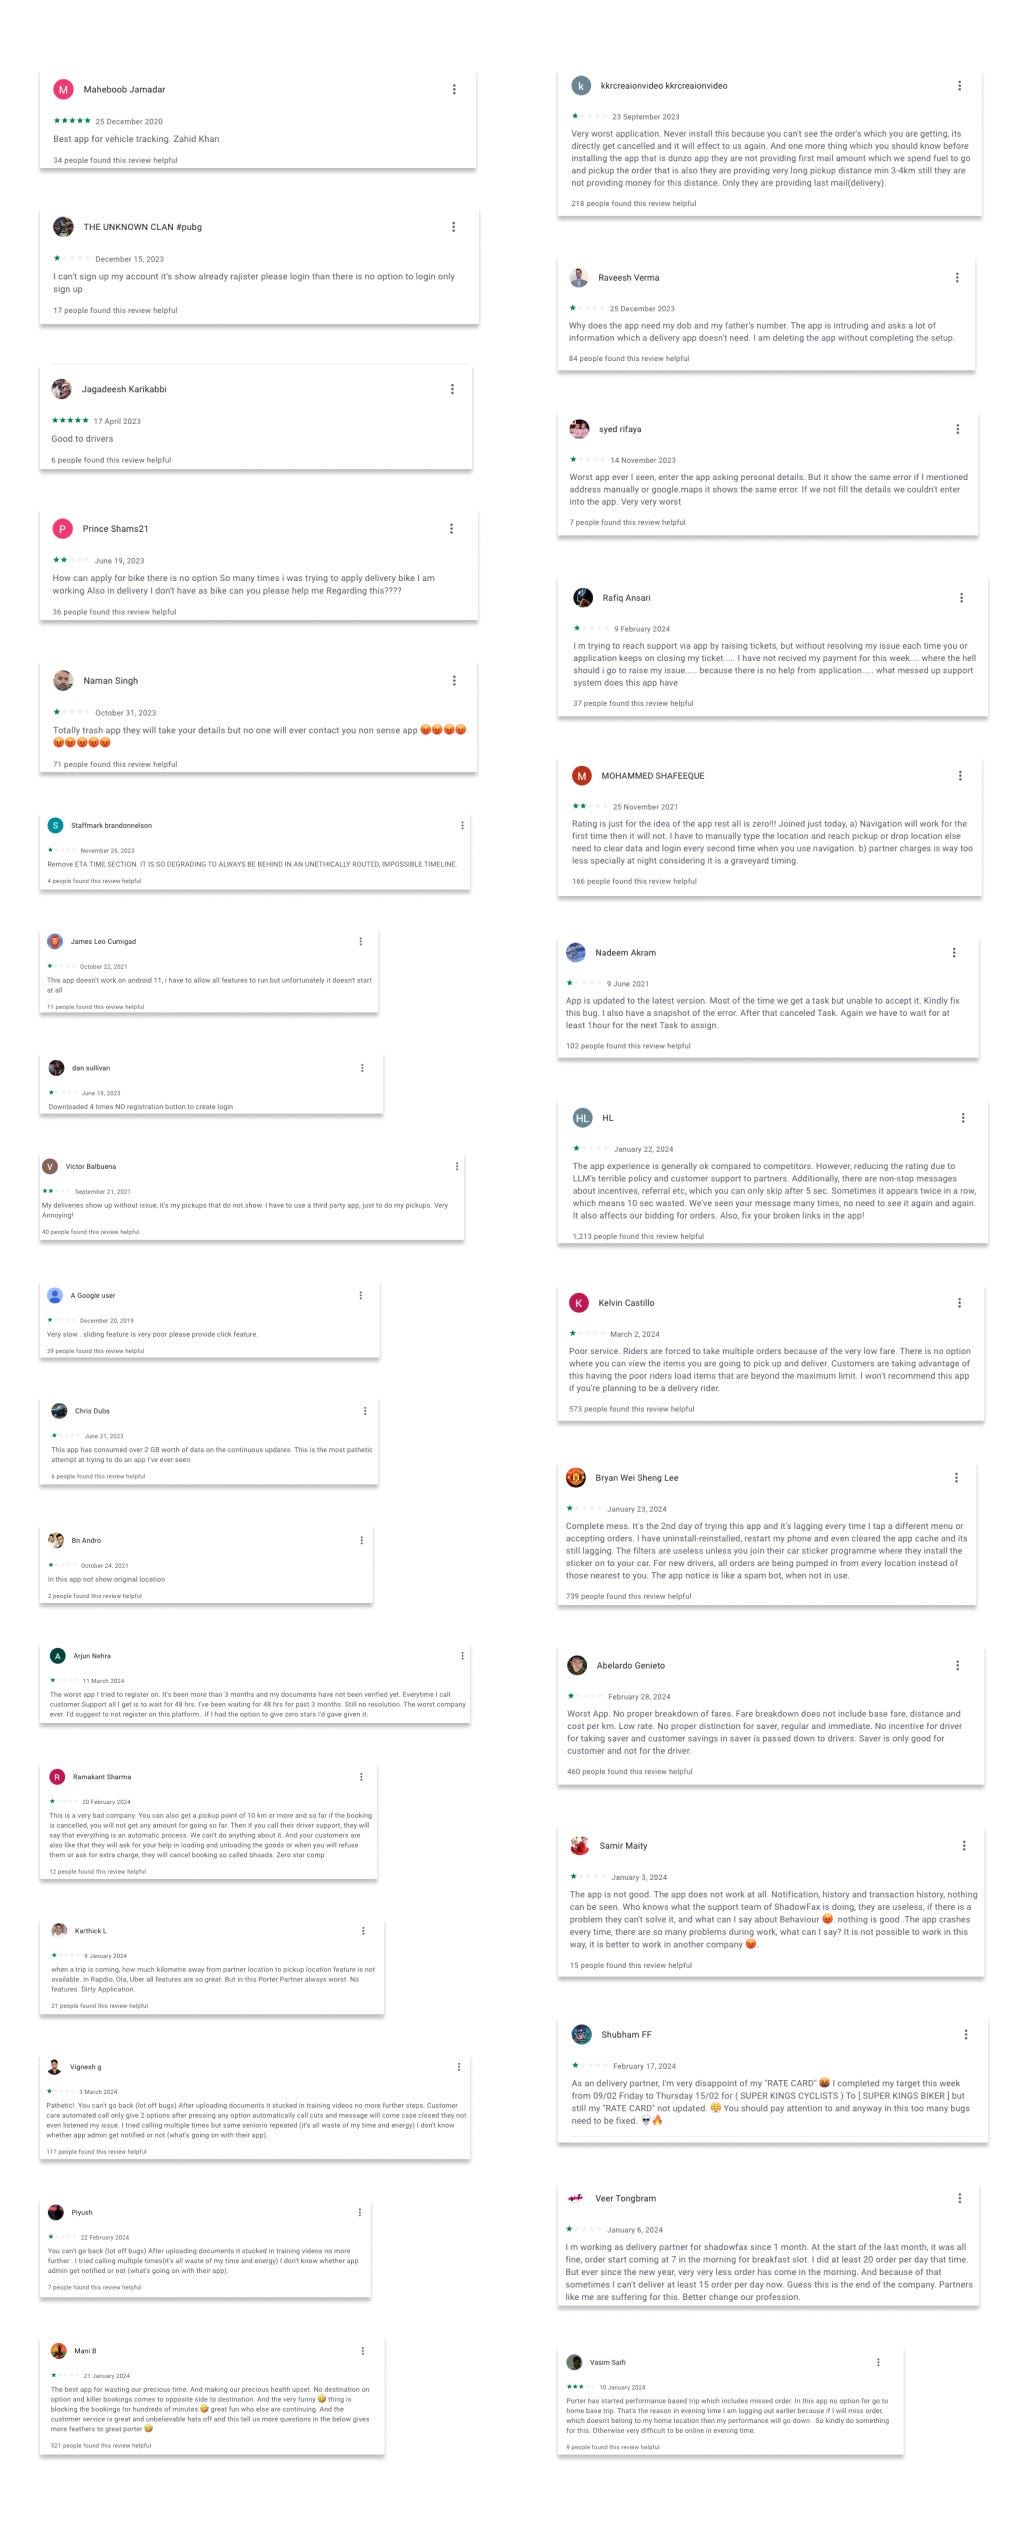 User Reviews regarding the App performance by the drivers on the Play Store.